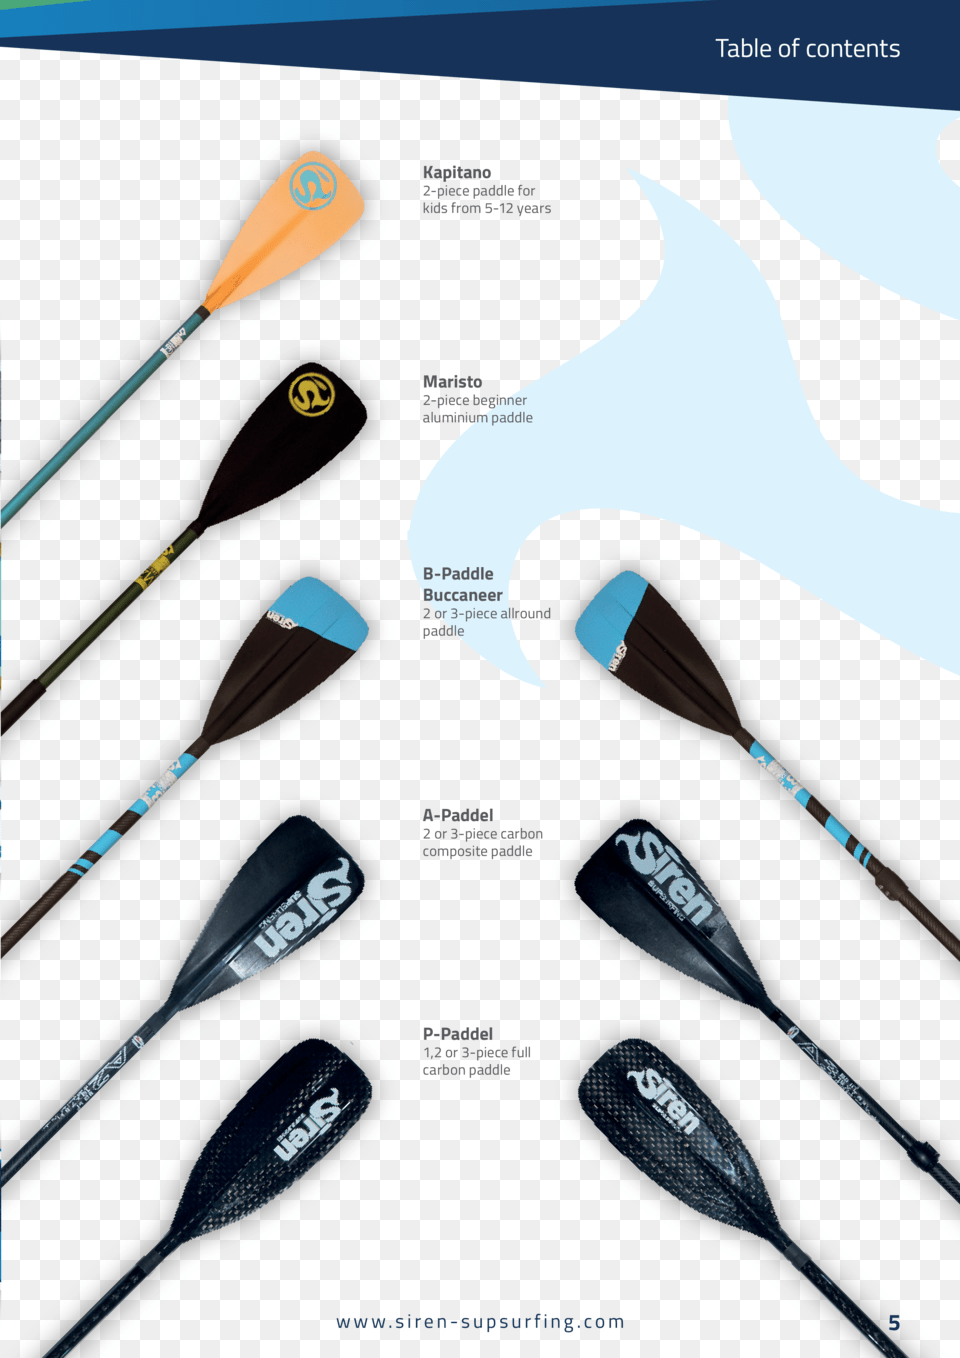 Table Of Contents Kapitano 2 Piece Paddle For Kids Sailor, Oars, Cutlery, Spoon Free Png